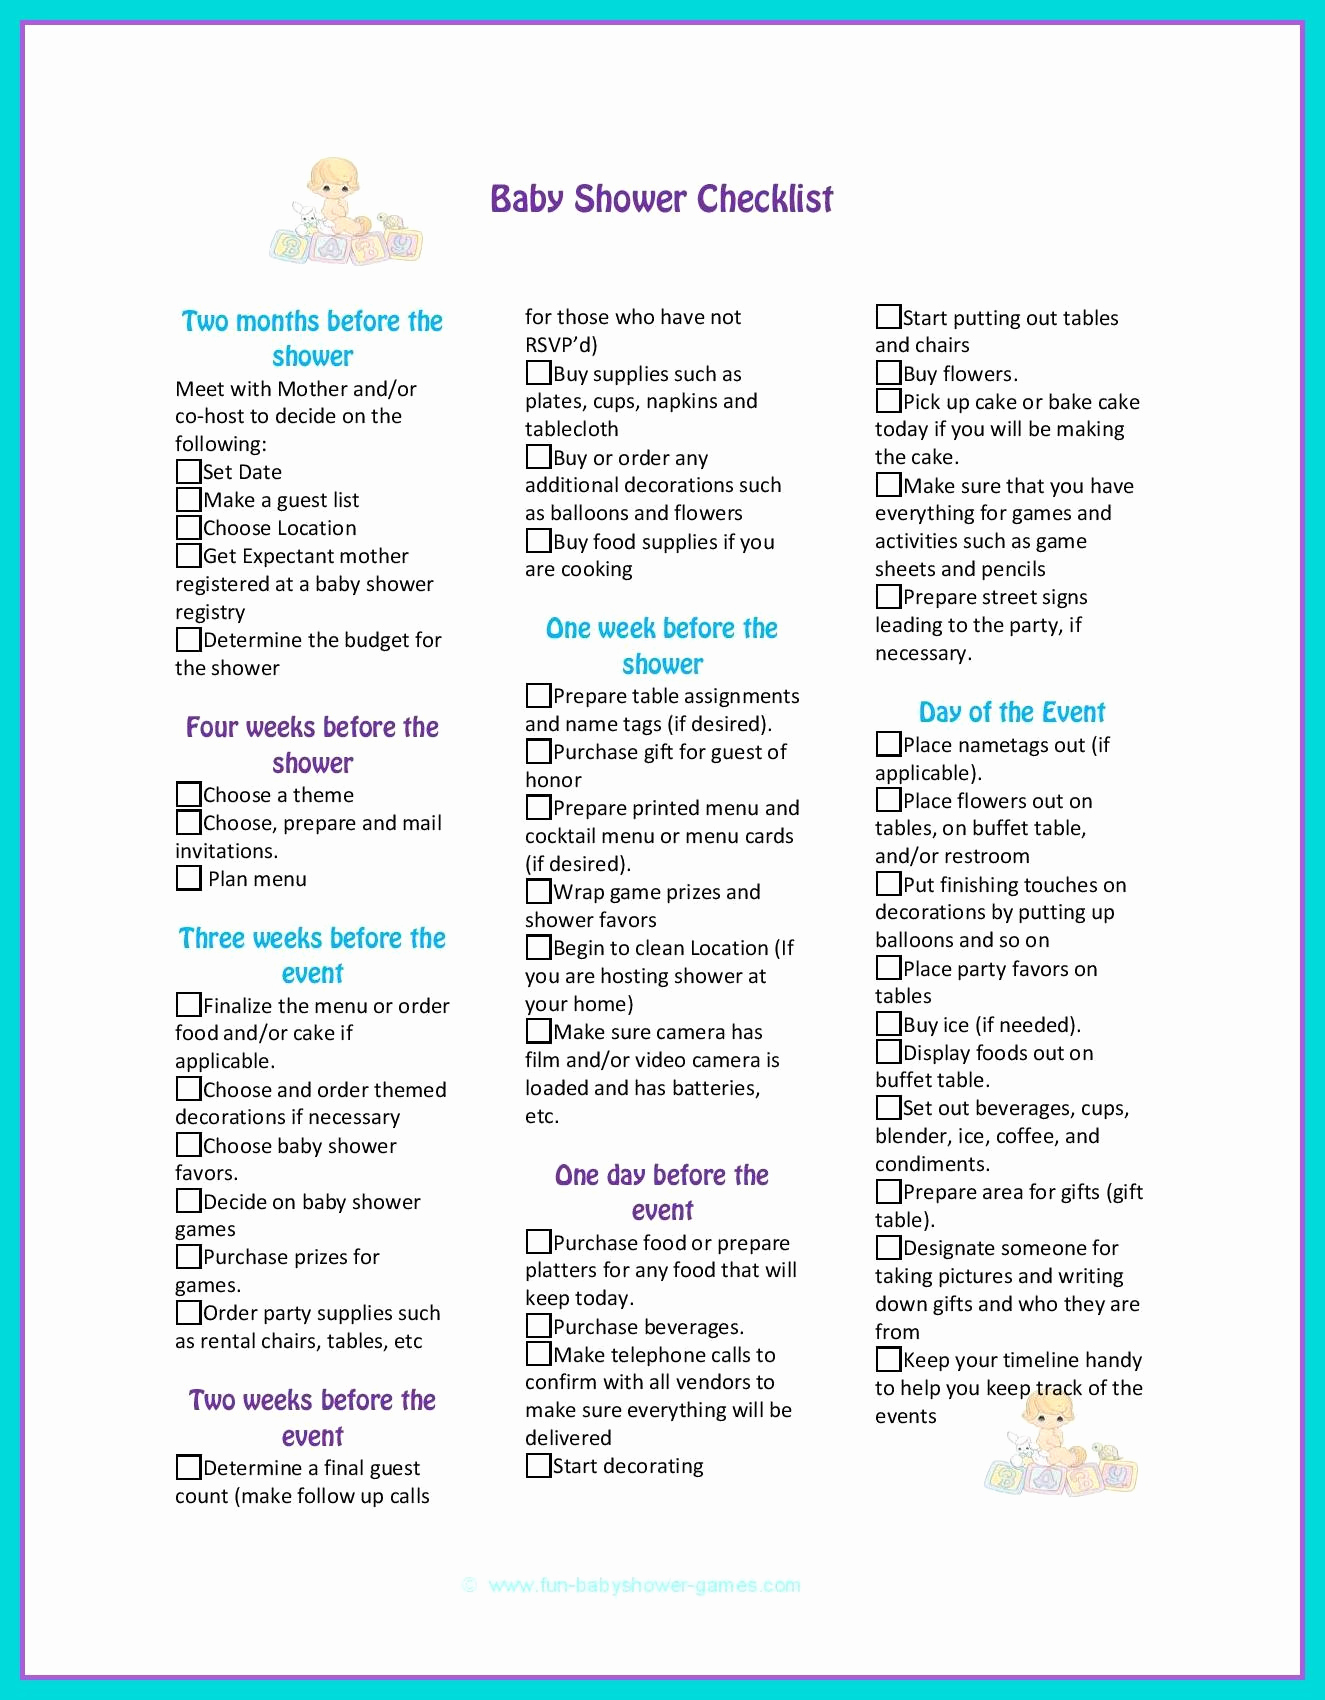 Baby Shower to Do List Awesome Baby Shower Checklist to Help Plan the Perfect Baby Shower